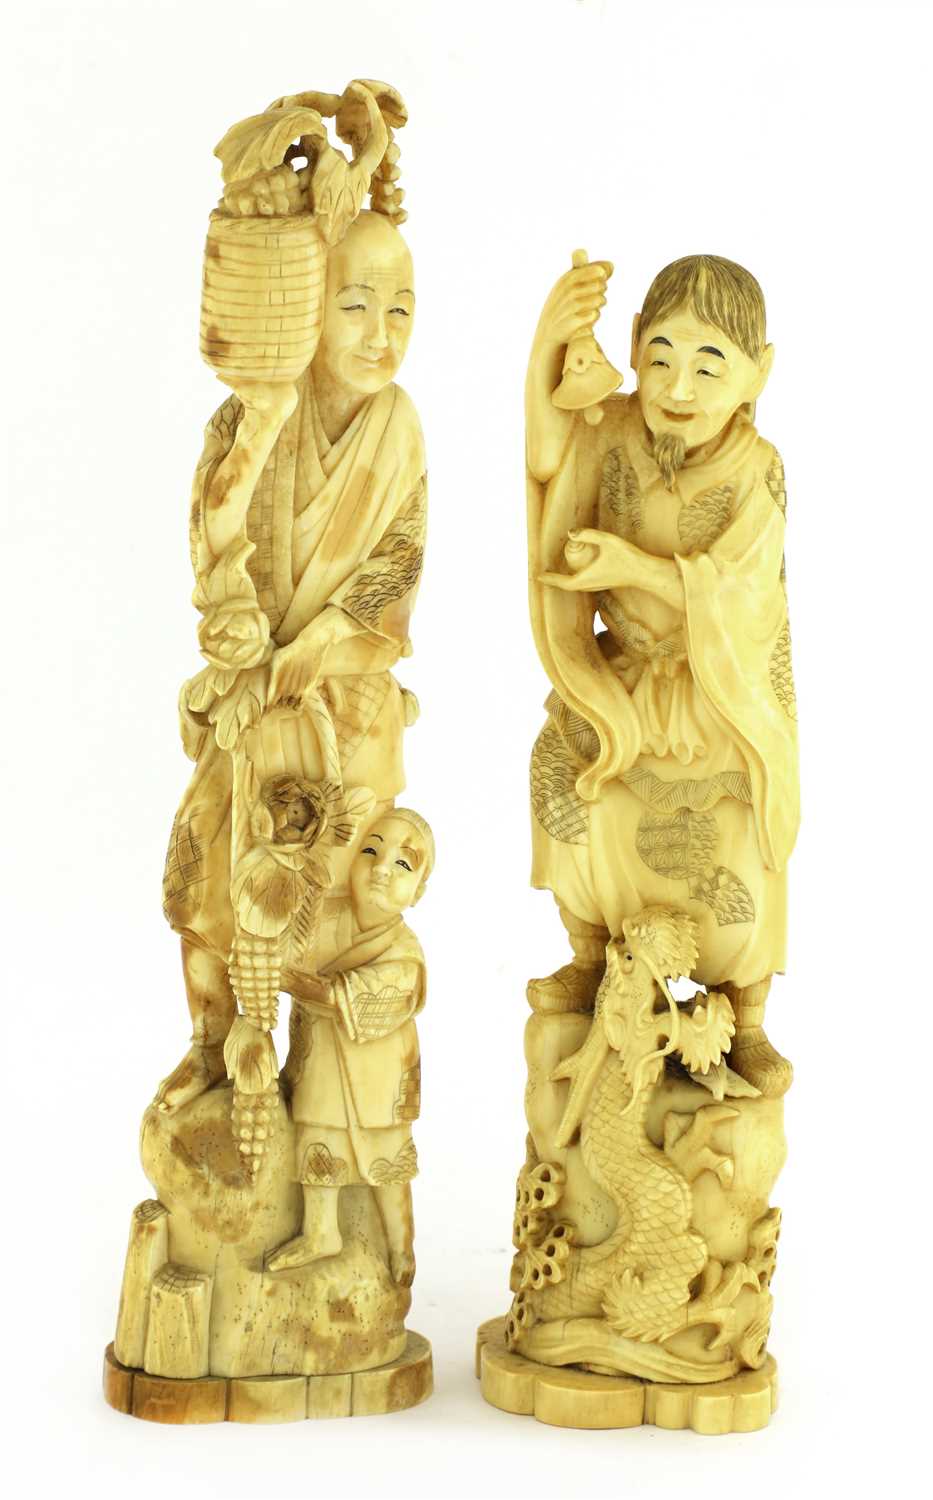 Lot 124 Two Japanese Carved Ivory Figure Groups